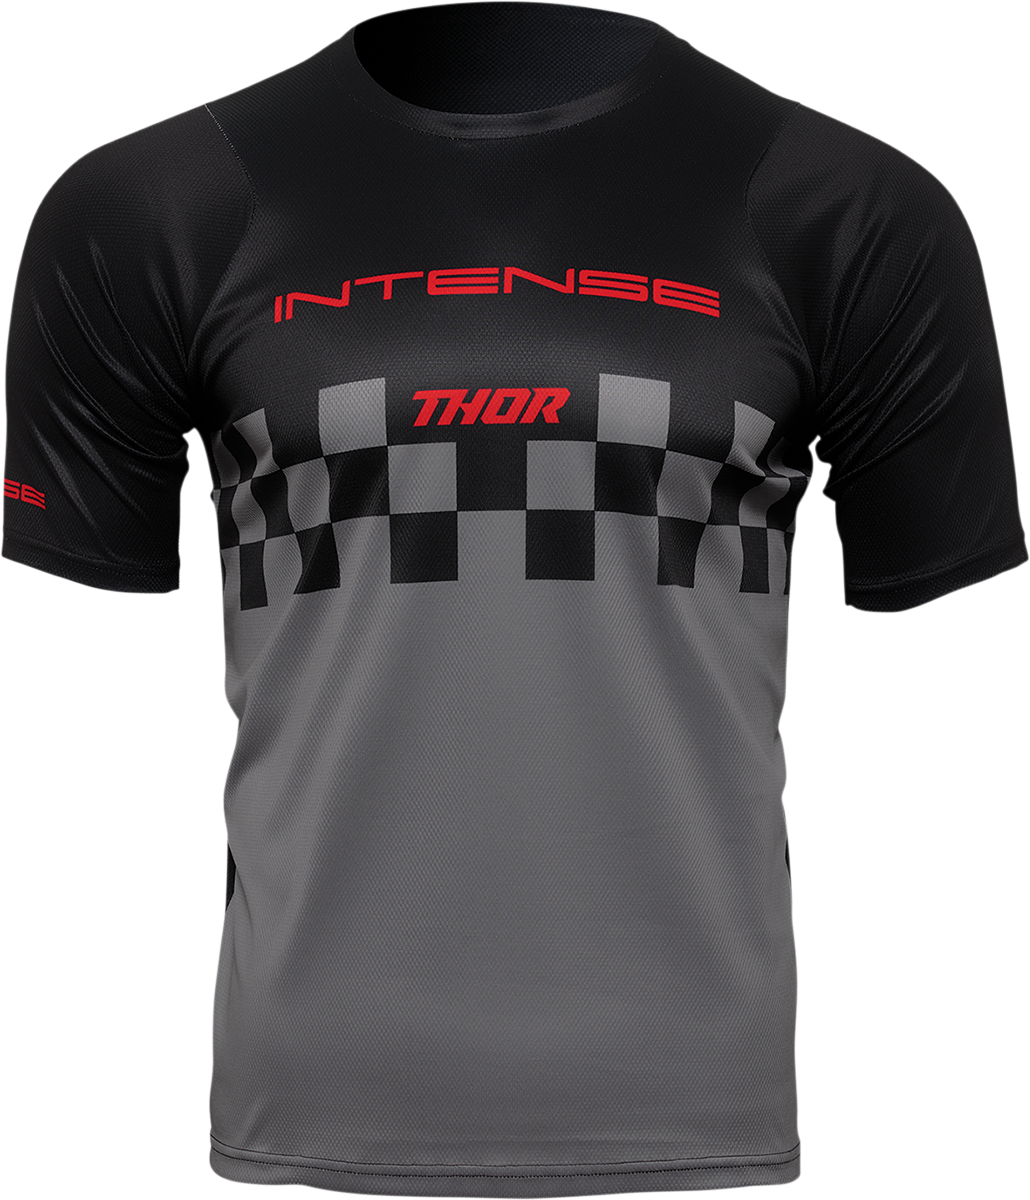 THOR Intense Chex Jersey - Black/Gray - Small 5120-0145